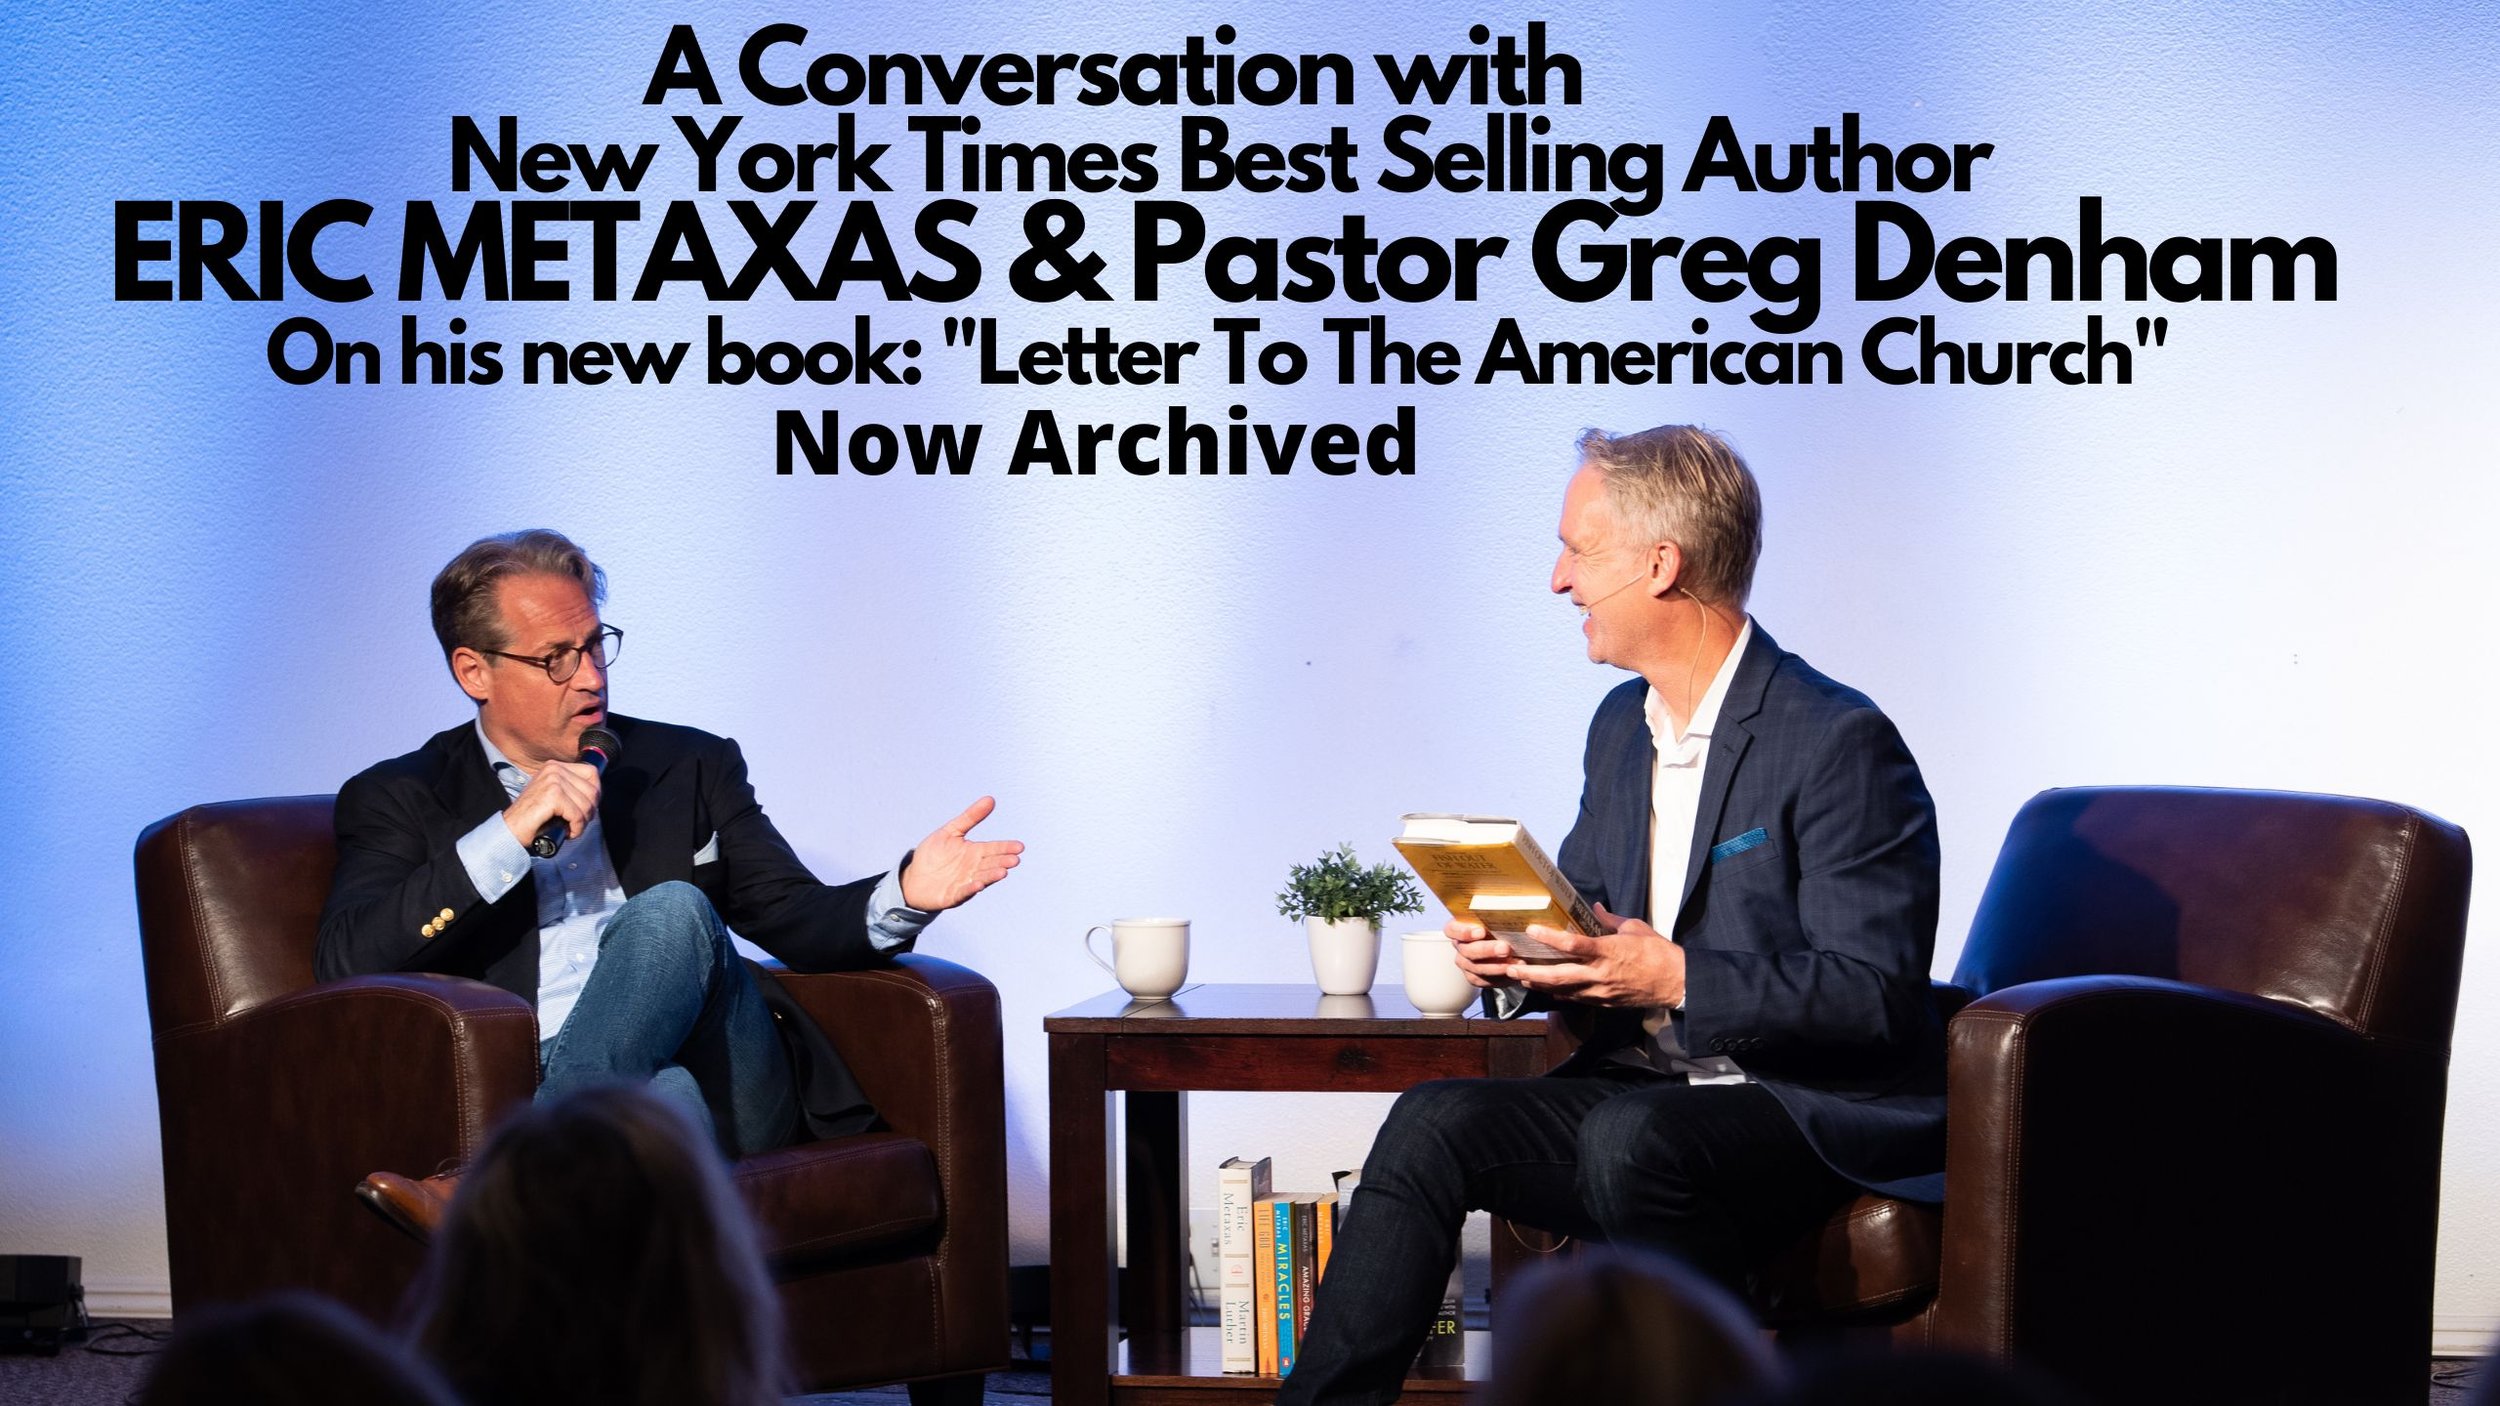 Is Atheism Dead A conversation with ERIC METAXAS and PASTOR GREG DENHAM LIFE.jpg